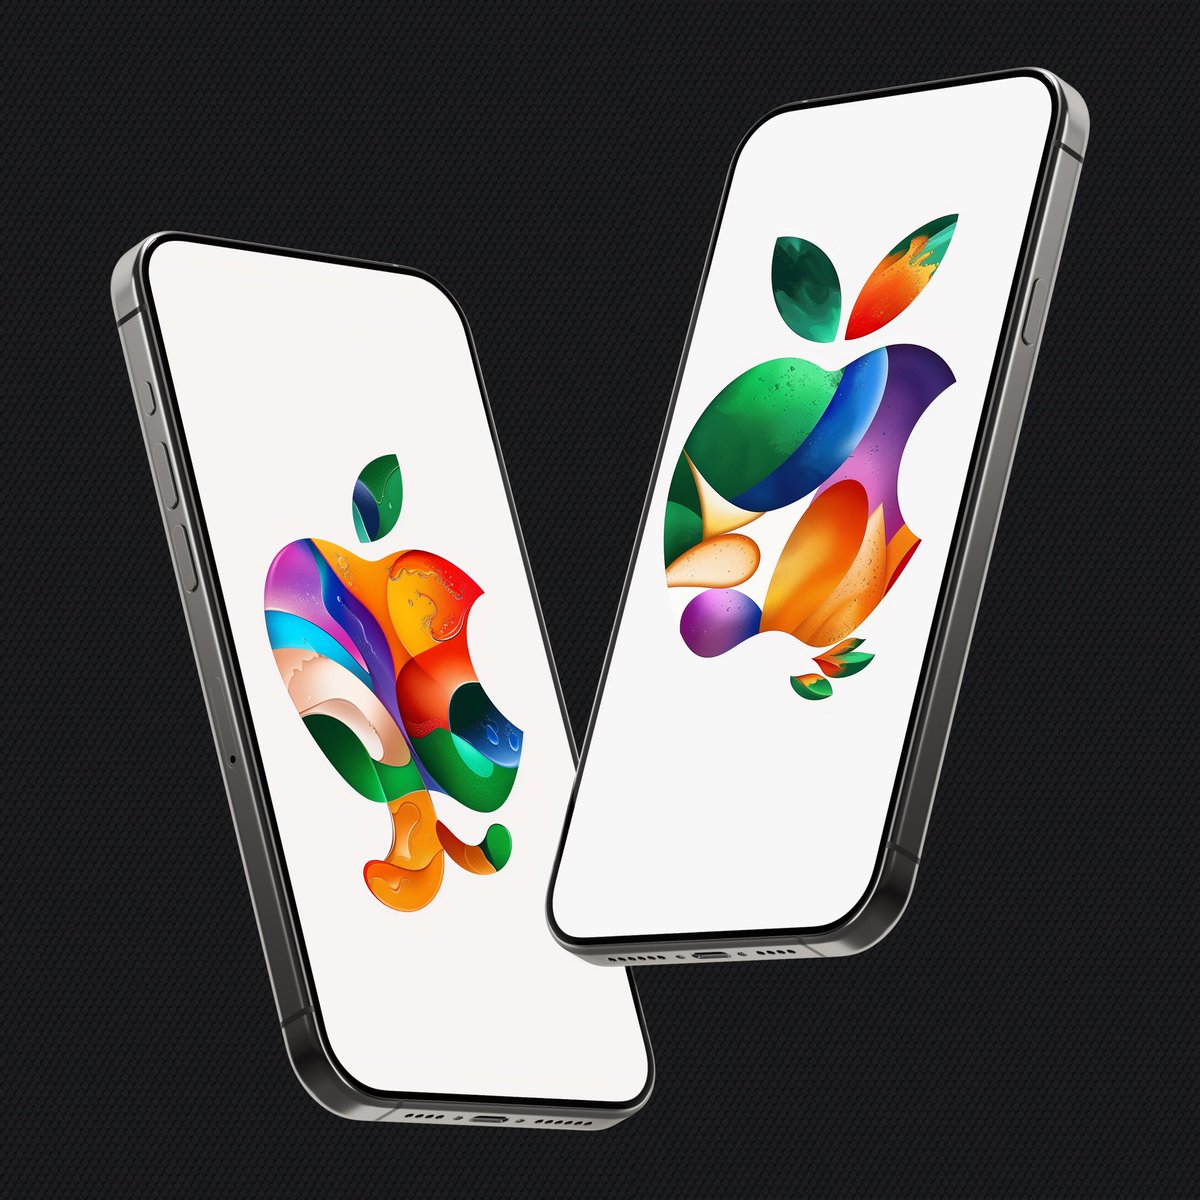 Just added a couple Apple event(ish) wallpapers to Ⓜ️ and telegram. Hope you like bright wallpapers 😎 M Mockup iOS App: apple.co/3Q5ajT9 Telegram channel: tinyurl.com/y2tt3nwm